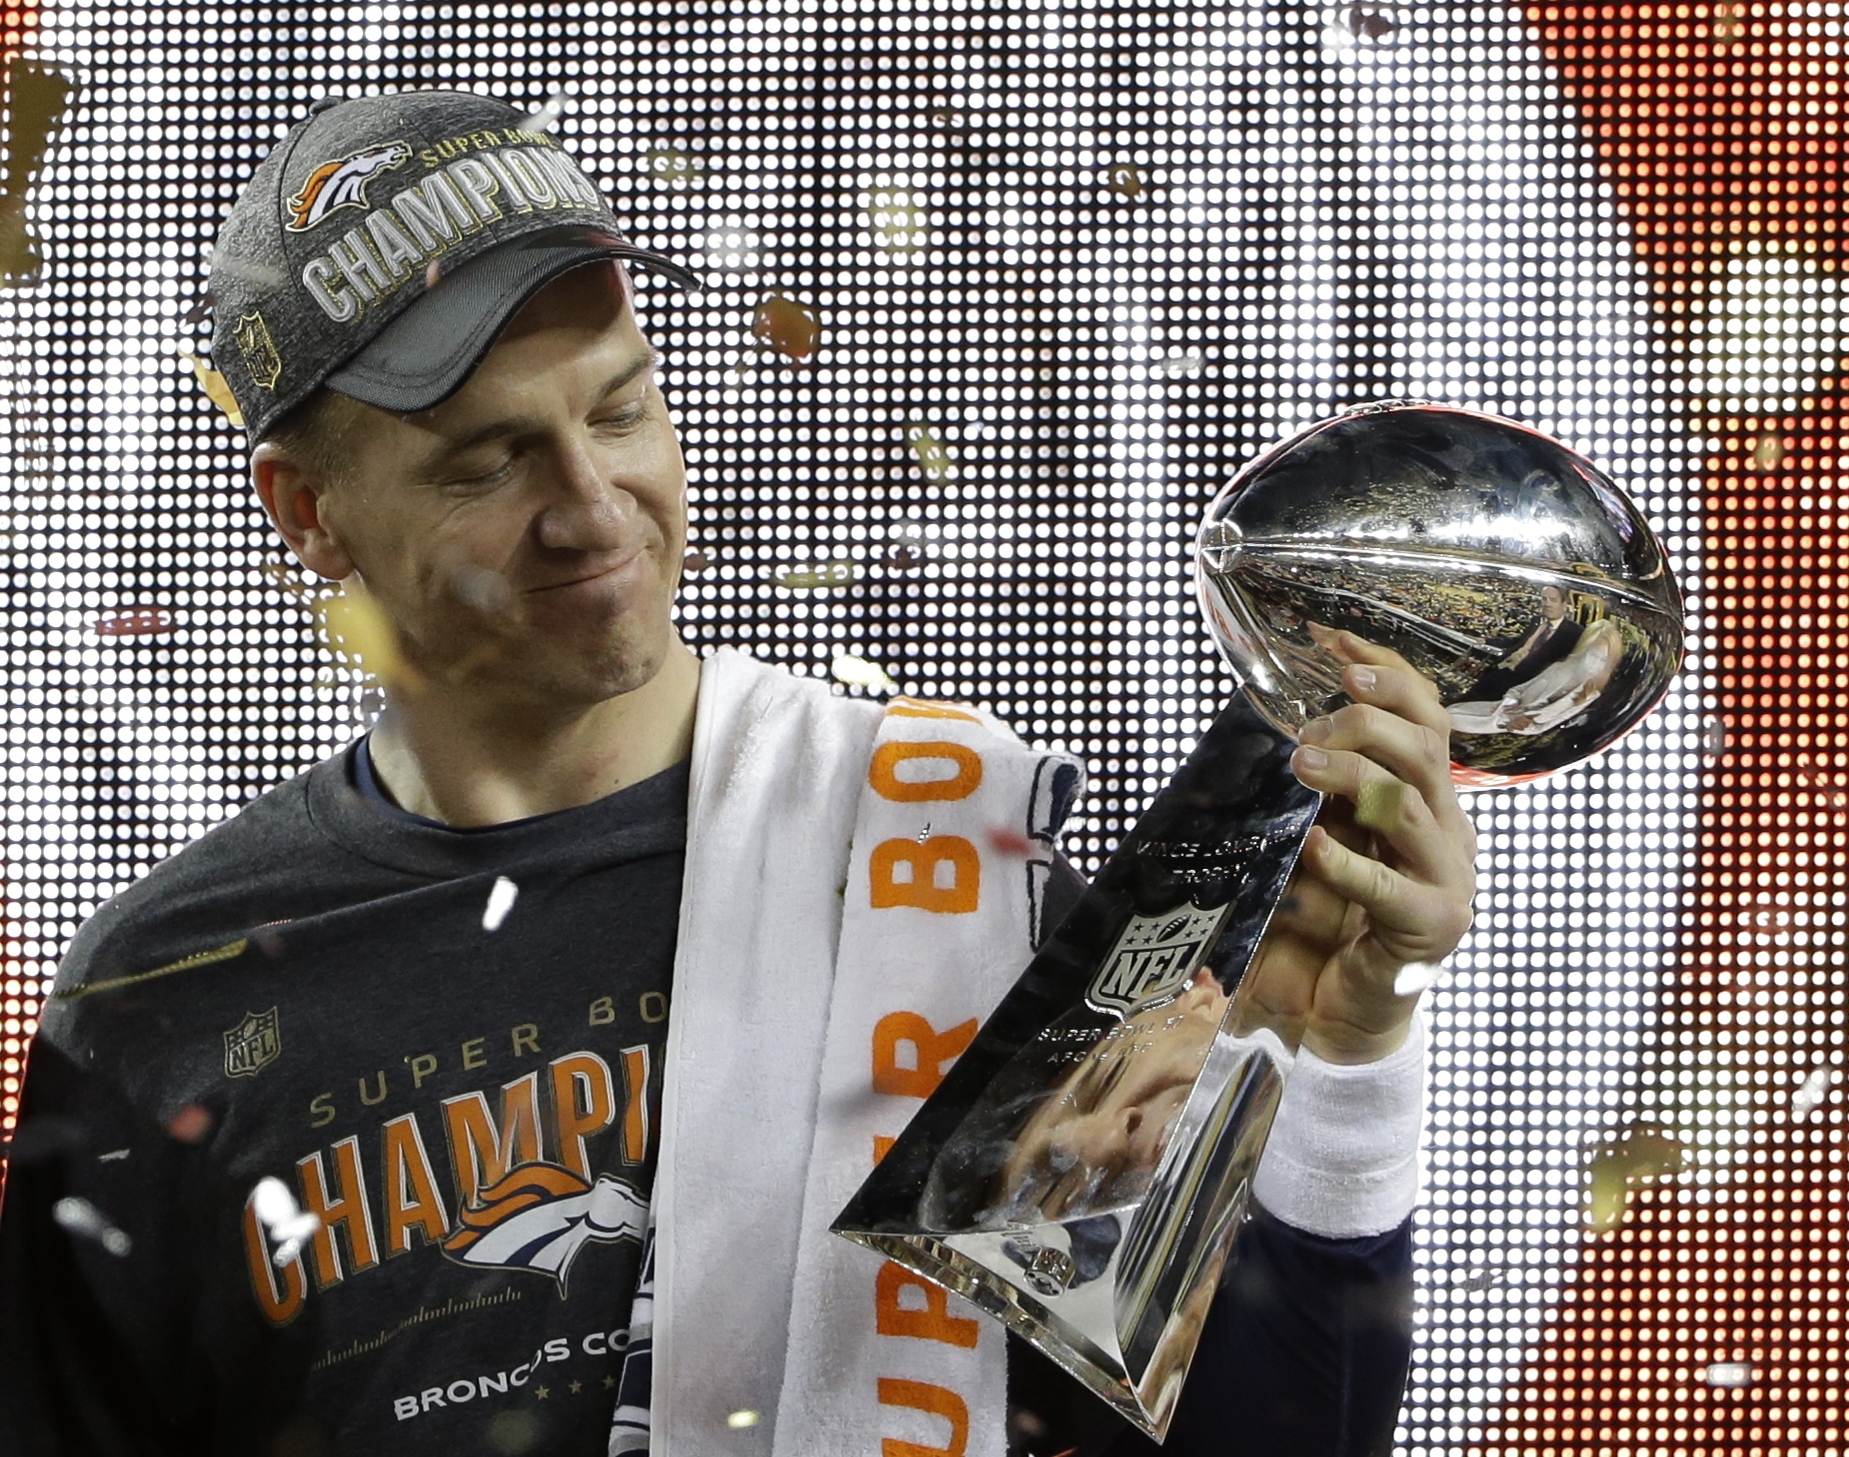 The greatest moments in Denver Broncos' Super Bowl history